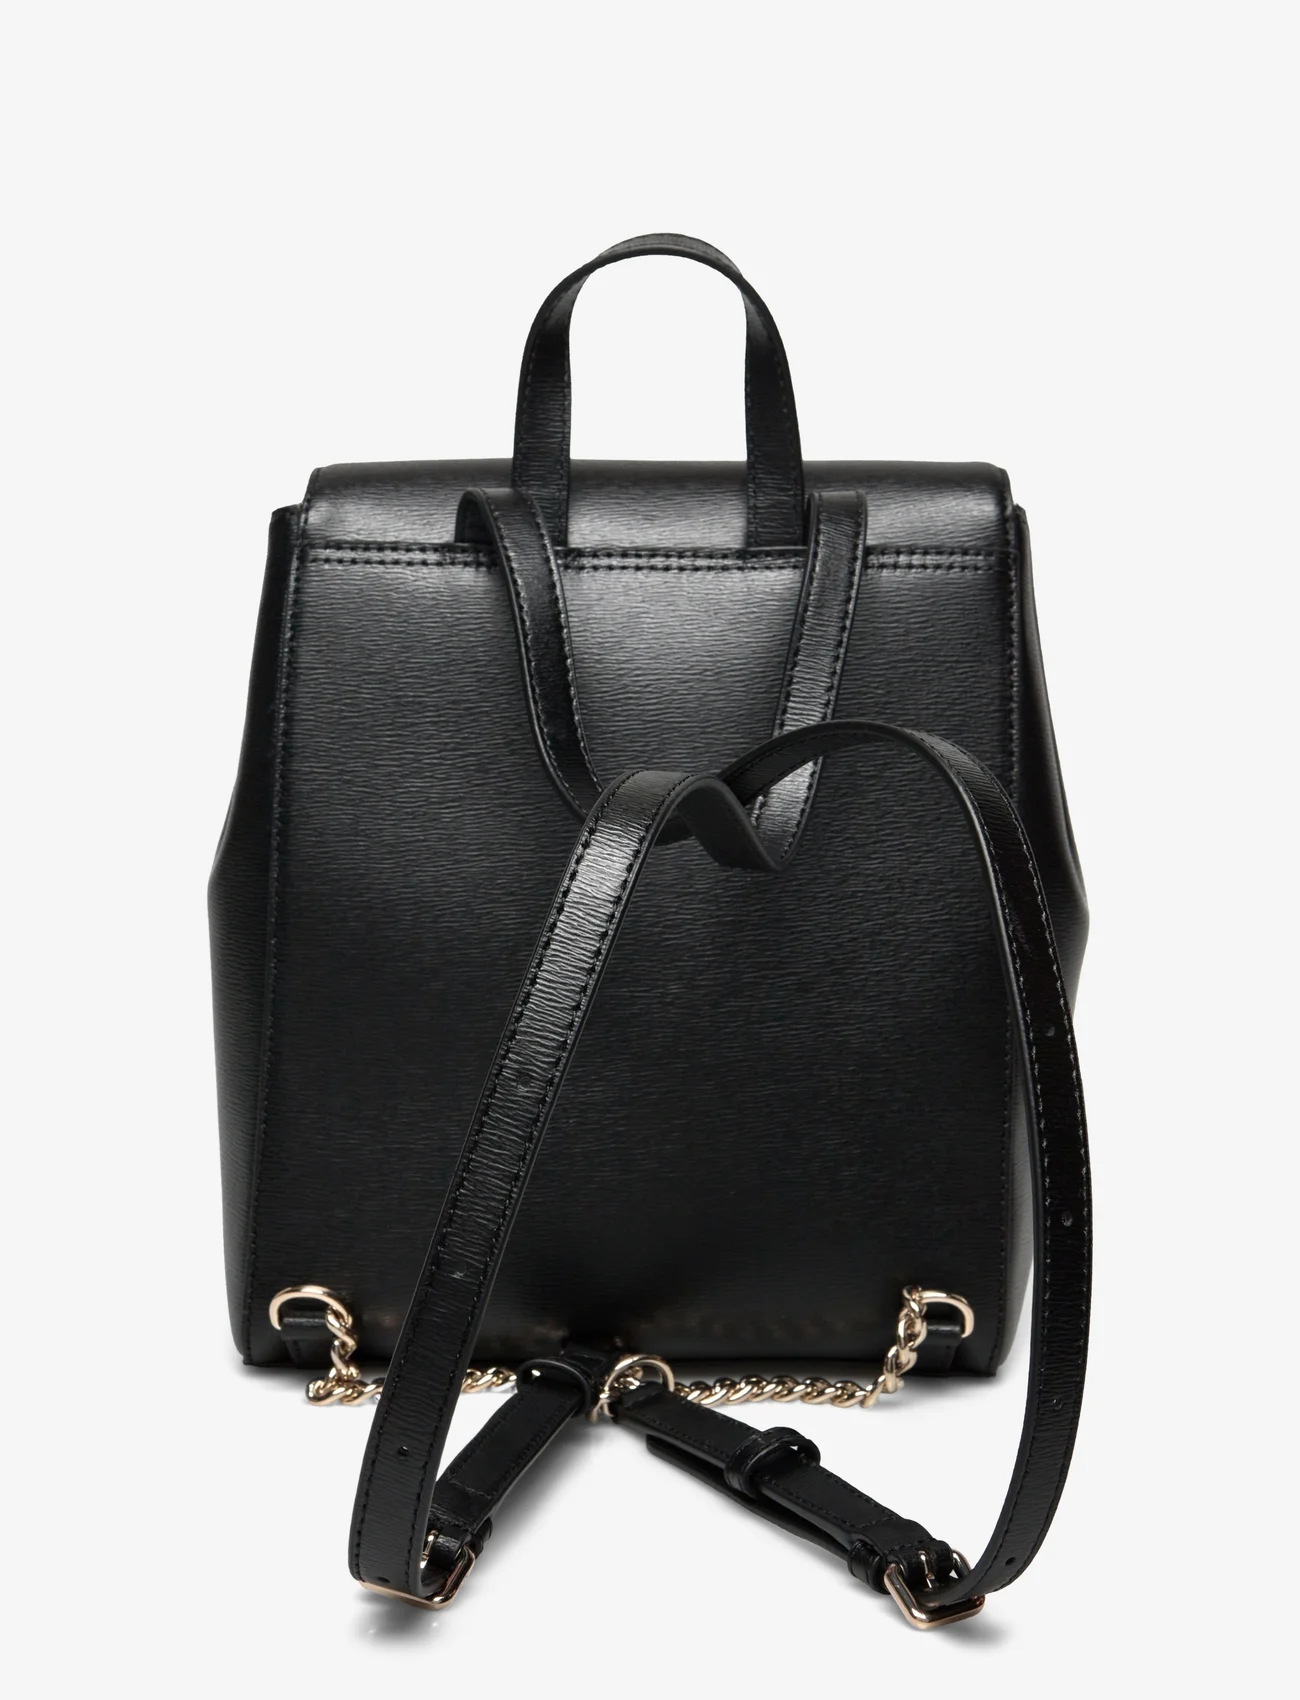 DKNY Bags - BRYANT FLAP BACKPACK - dames - bgd - blk/gold - 1